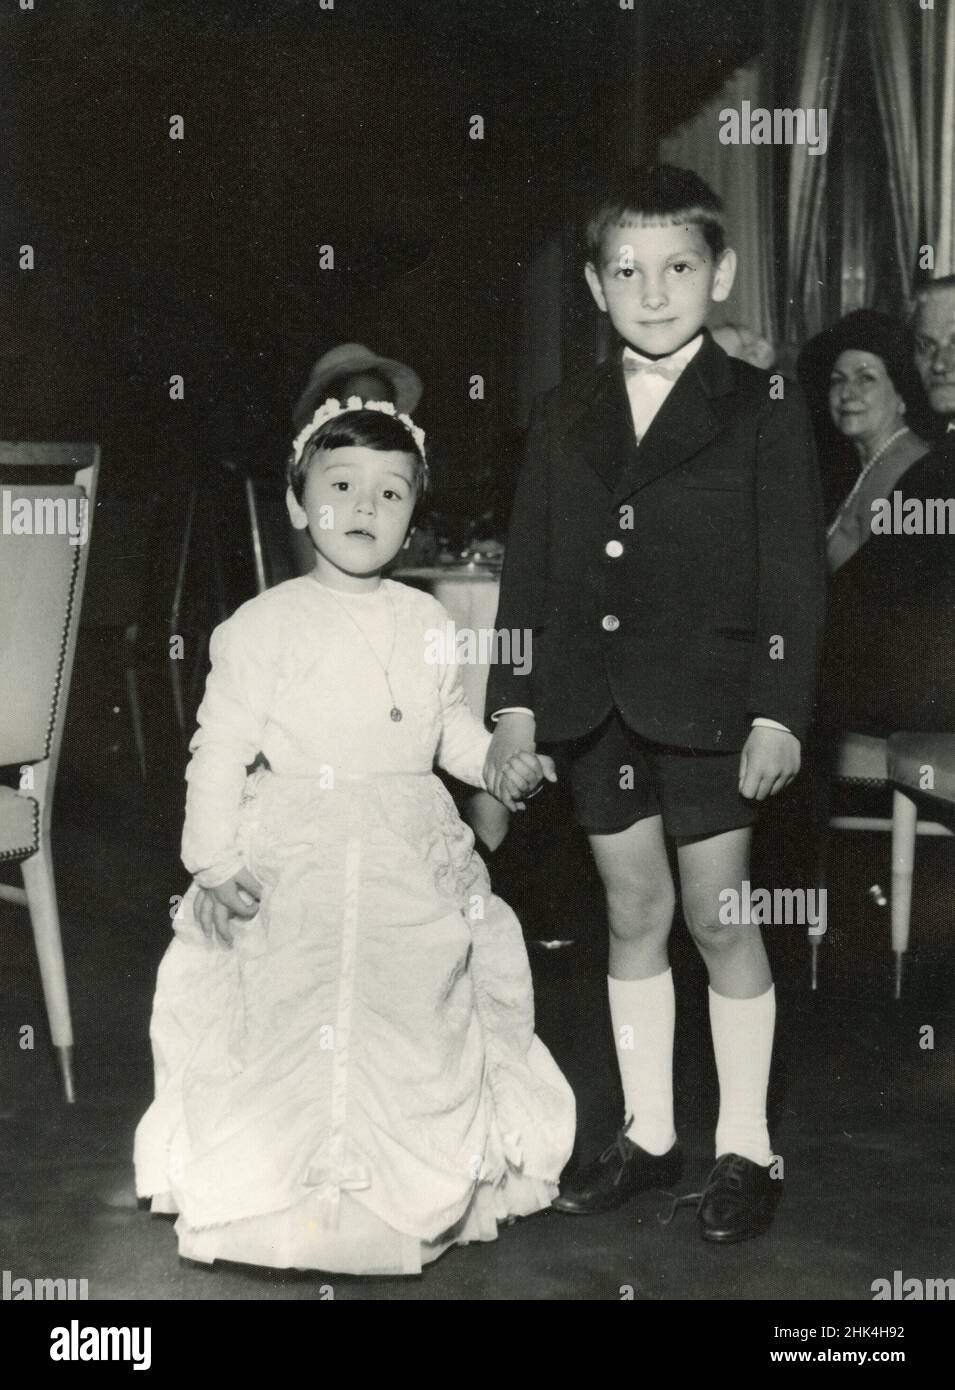 Wedding in Italy during the 1950s: The youngest couple among the guests Stock Photo